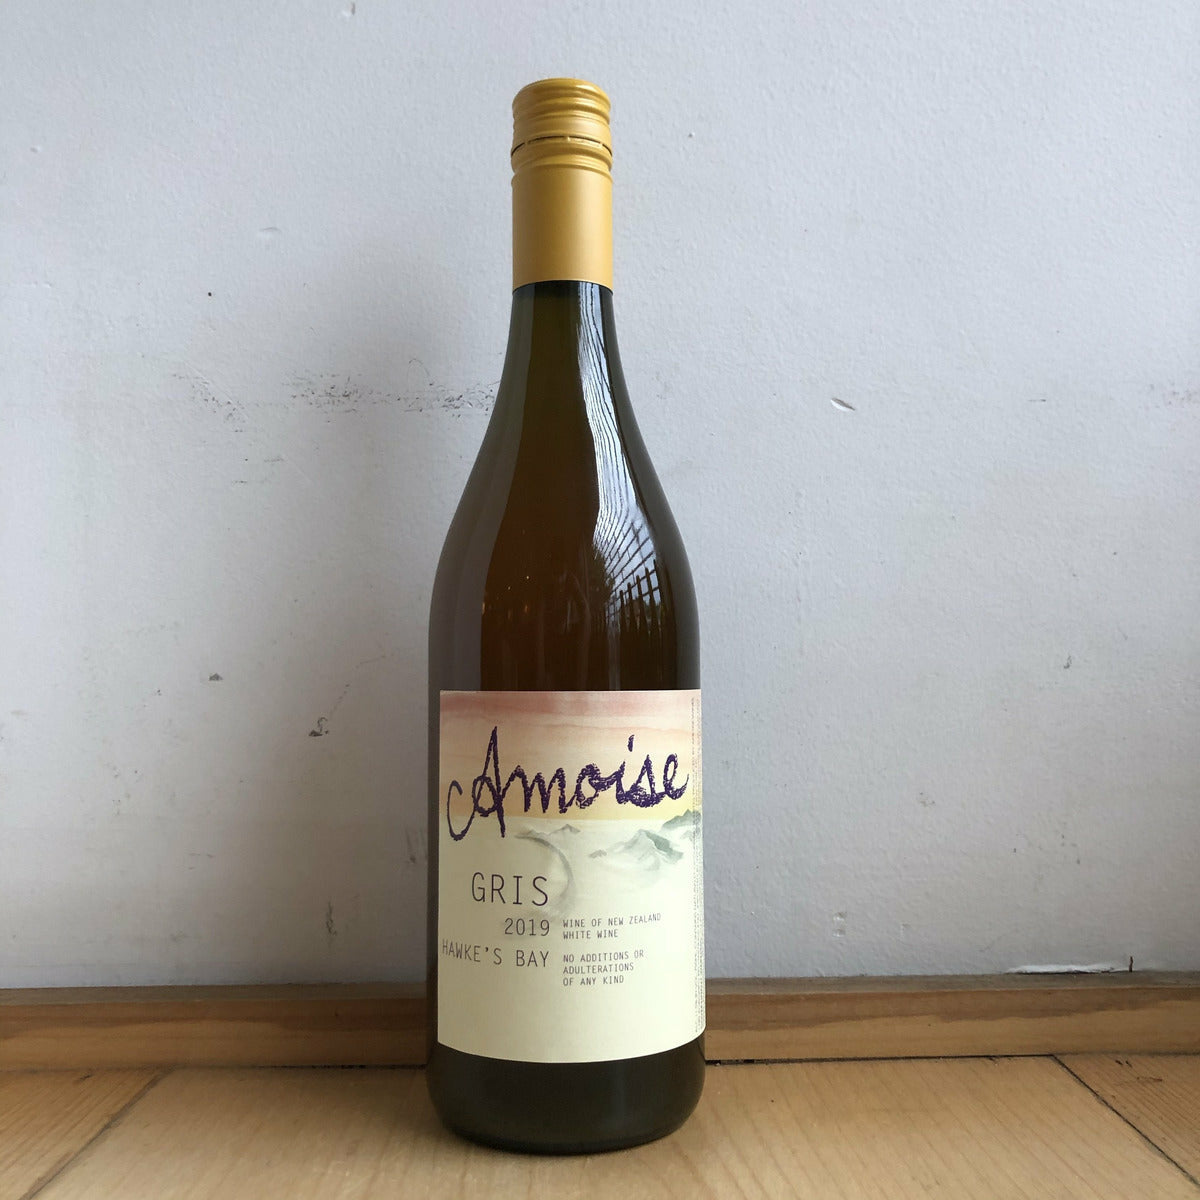 Amoise, Skin-Fermented Pinot Gris 2019